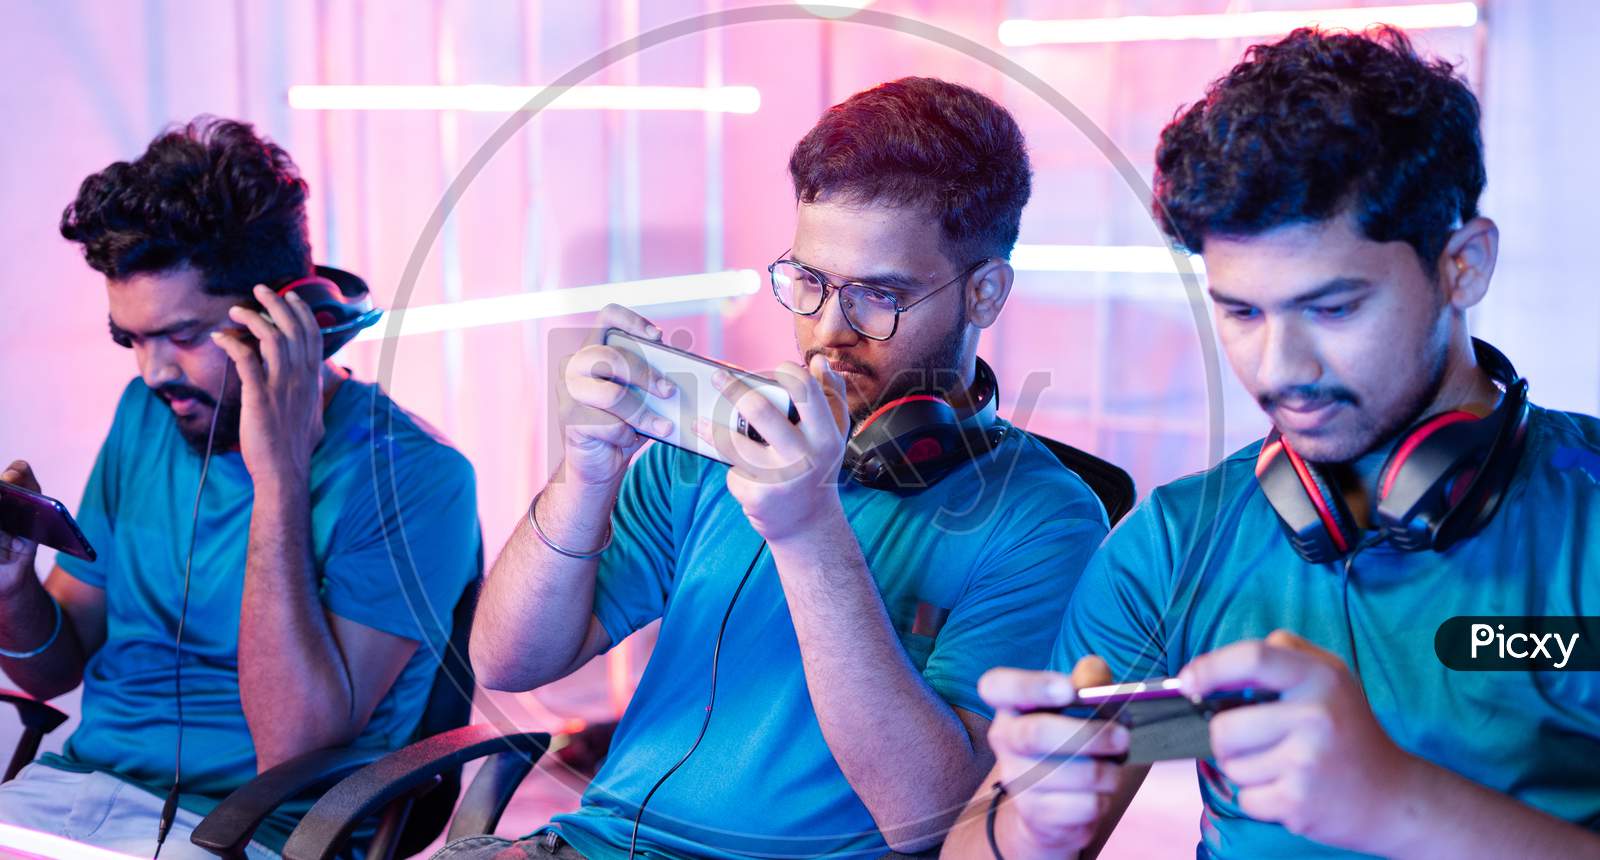 Team Of Young Professional Gamers Playing Live Video Game On Mobile Phone By Talking On Headphones At Esports League.